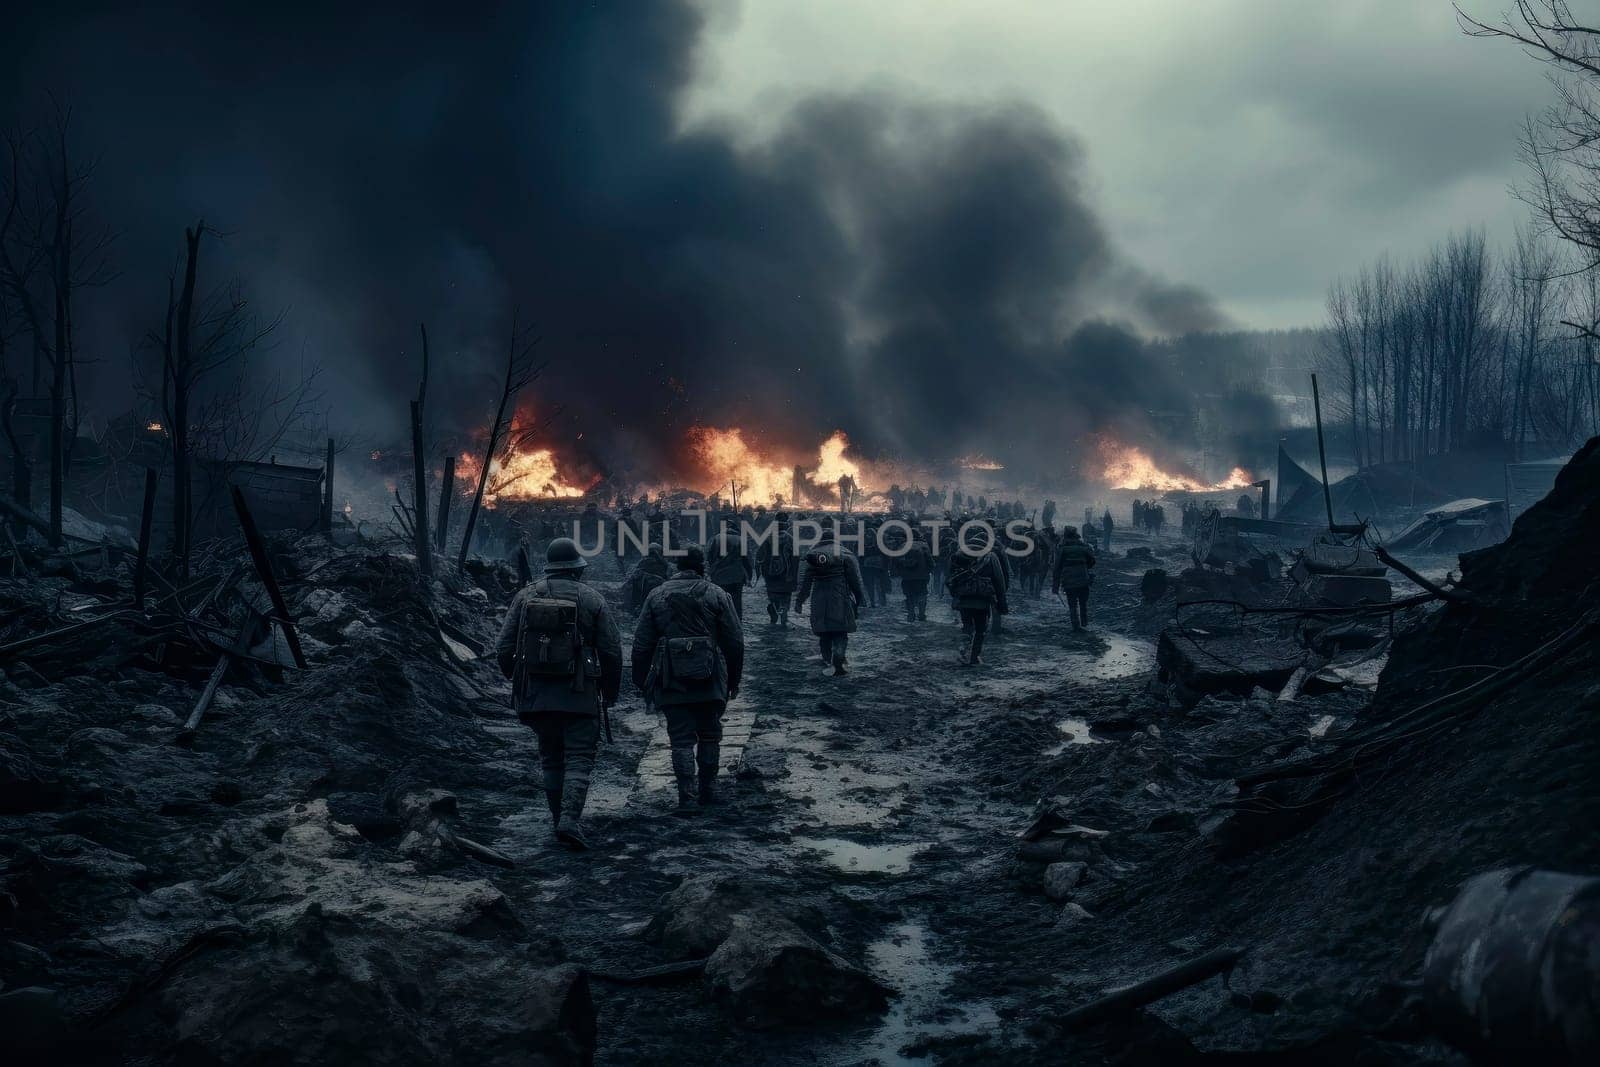 A powerful image capturing the aftermath of a war, depicting scenes of devastation and destruction.